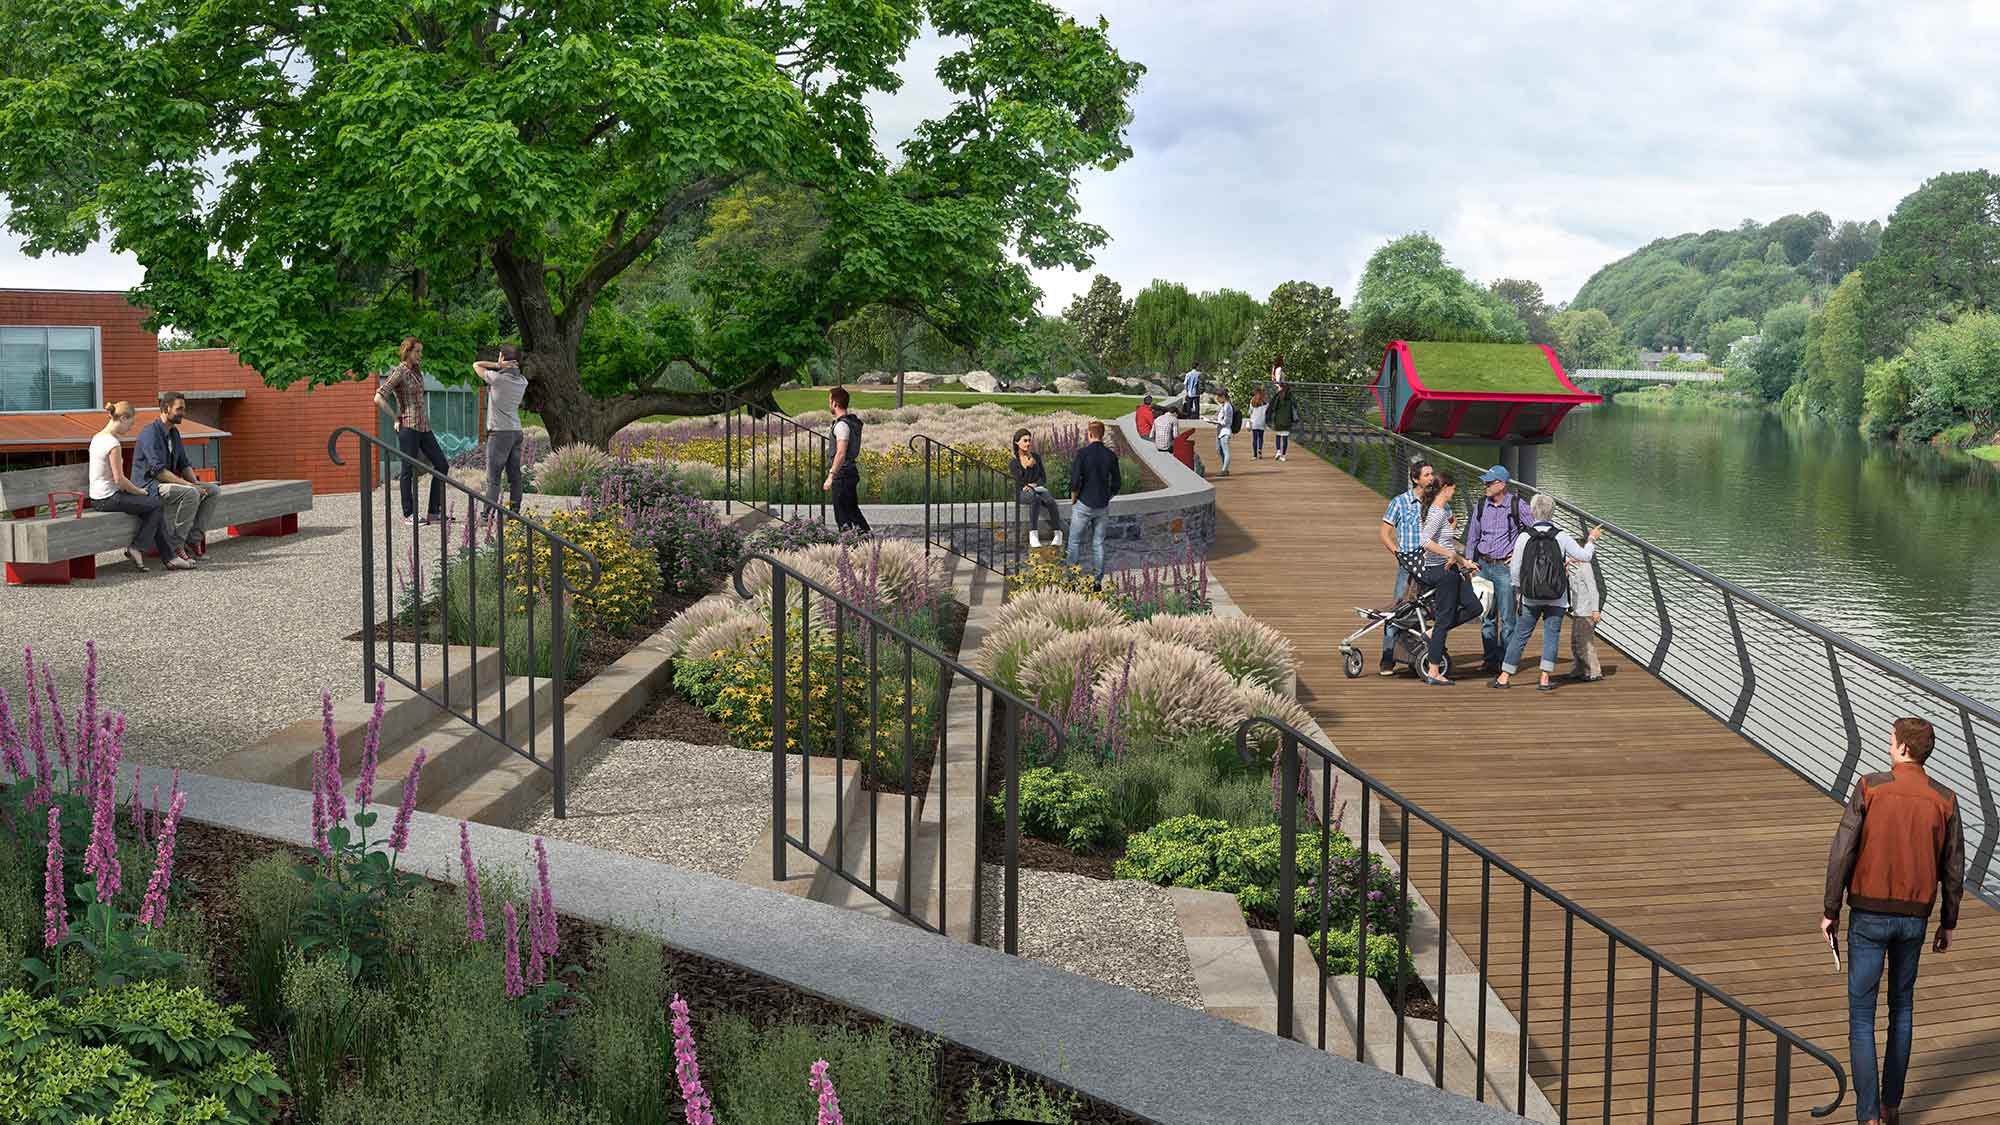 Photomontage of the proposed Lower Lee Flood Relief Scheme works at Fitzgerald's Park in Cork.